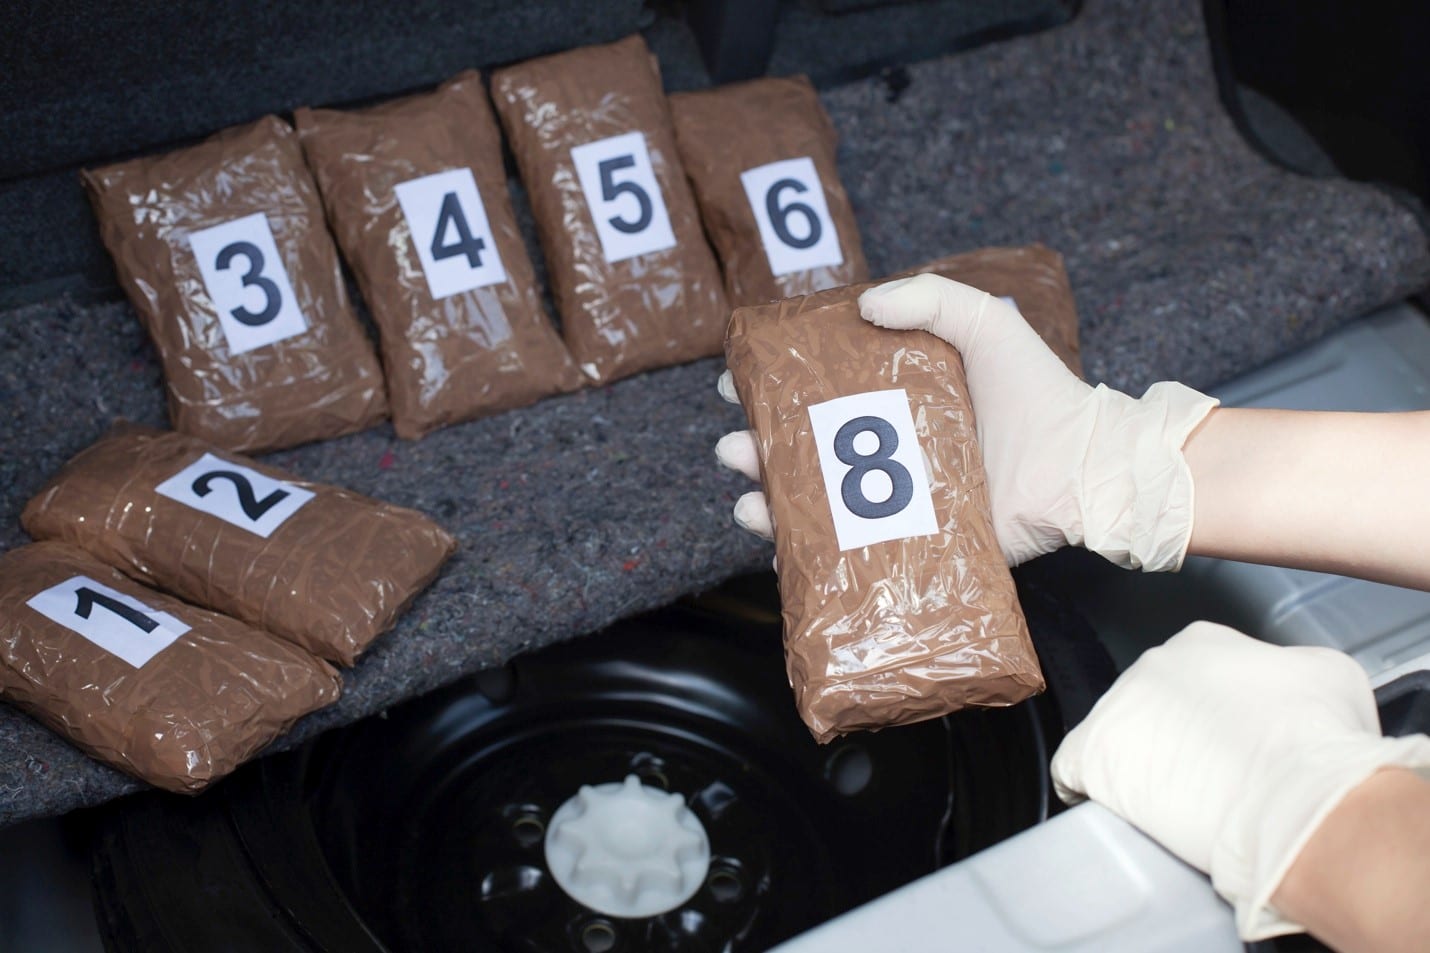 3 Things You Don’t Know About Drug Trafficking in Minnesota